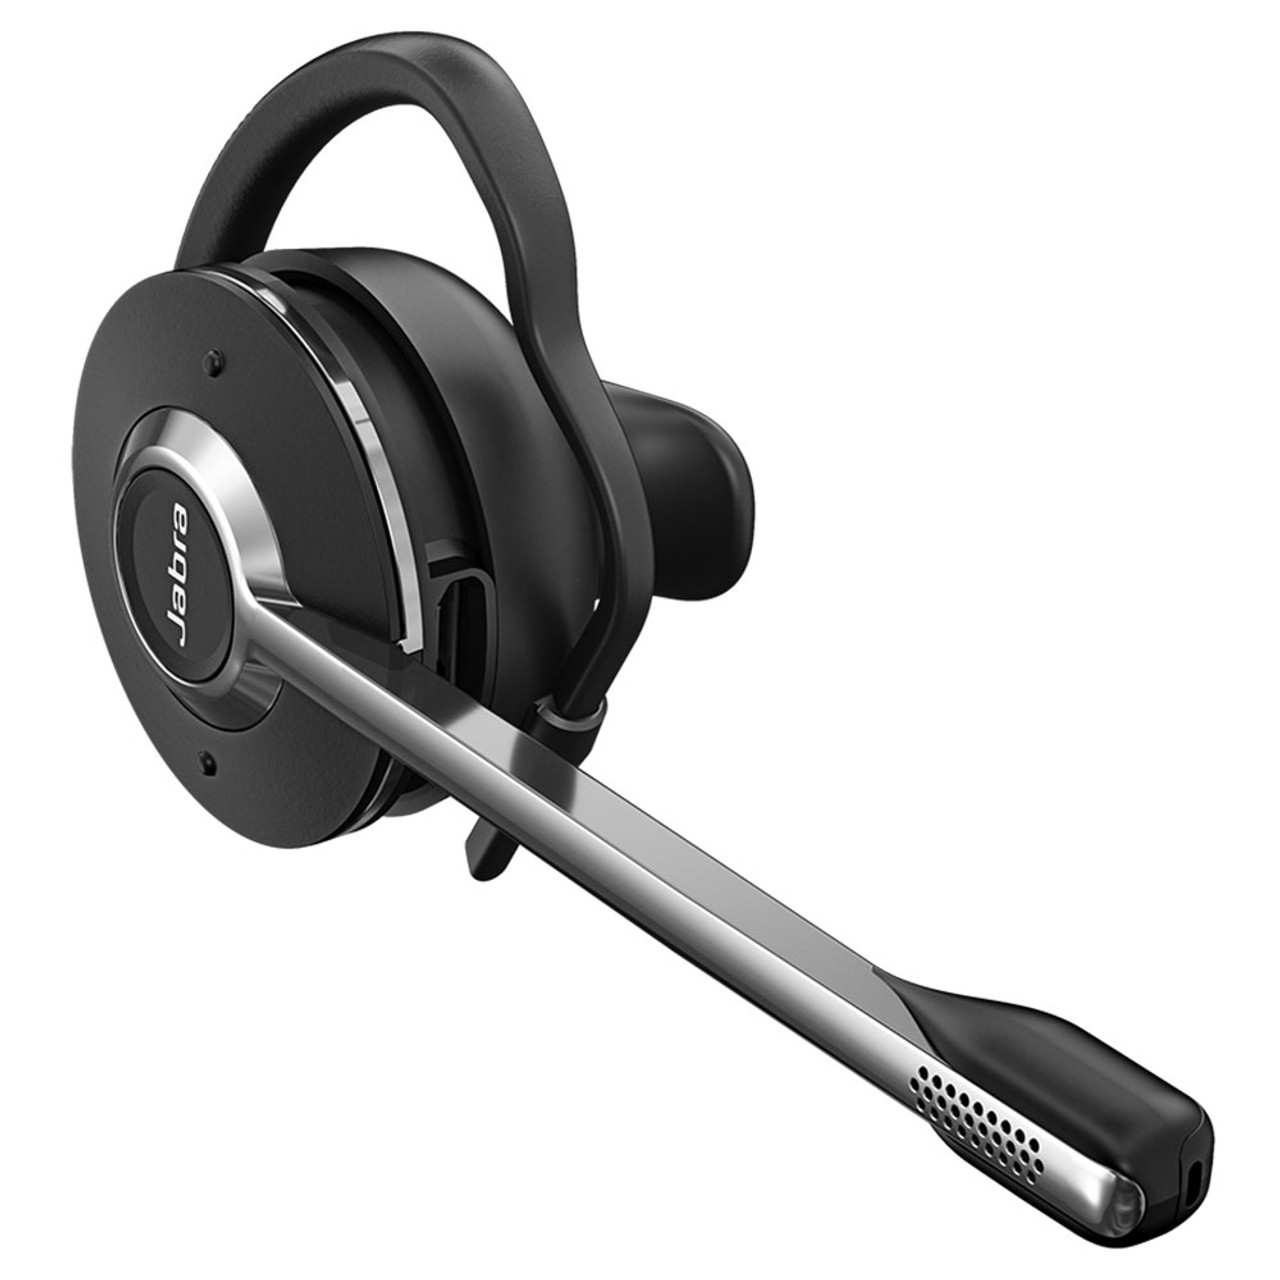 Engage 75 Convertible Wireless Headset for Desk Phone, PC & Mobile